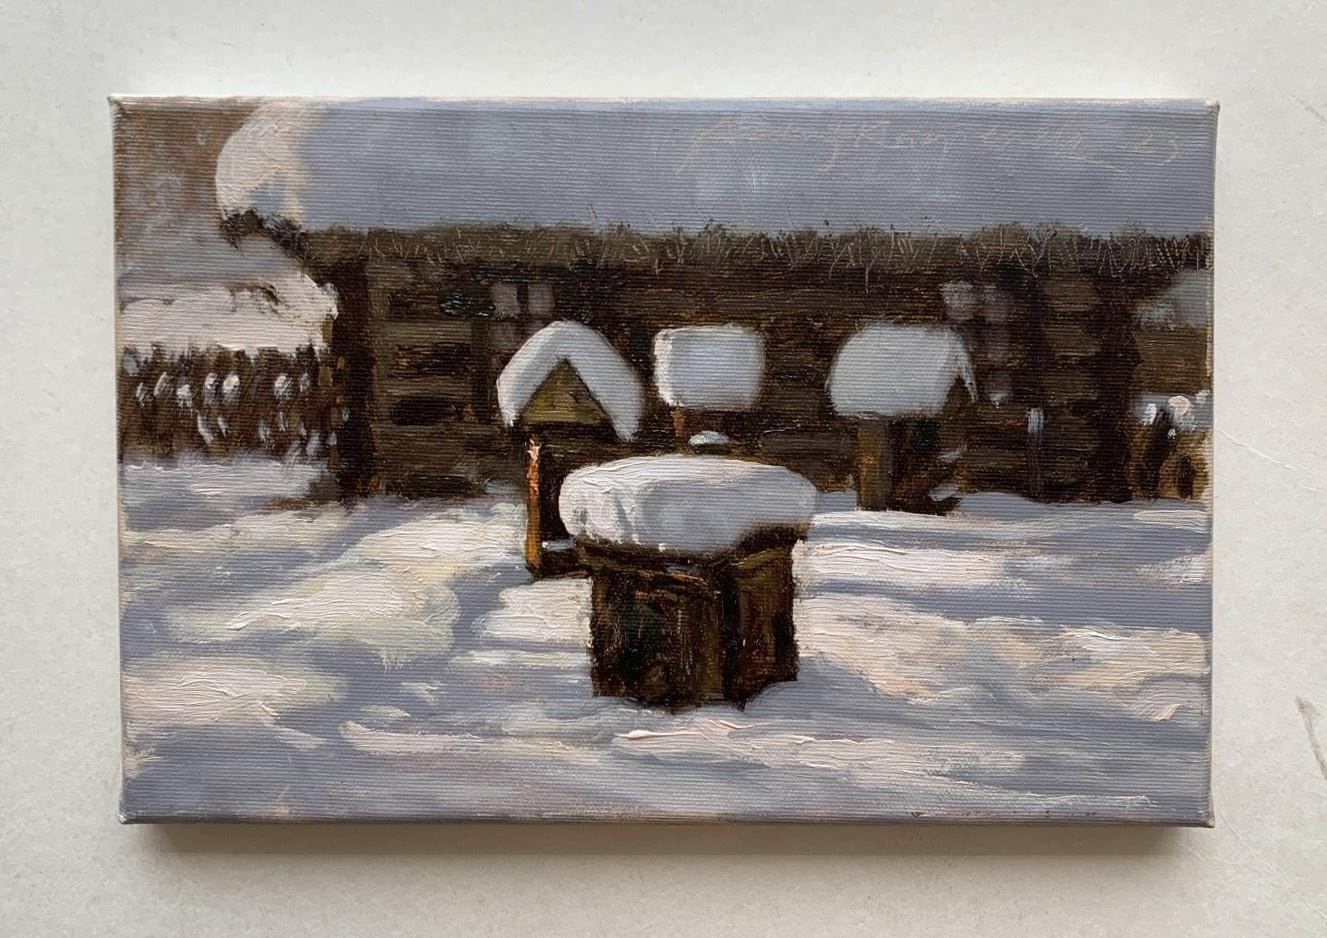 Sleeping beehives - 21 century, Oil painting, Landscape, Small scale, Polish art - Painting by Andrzej Kacperek